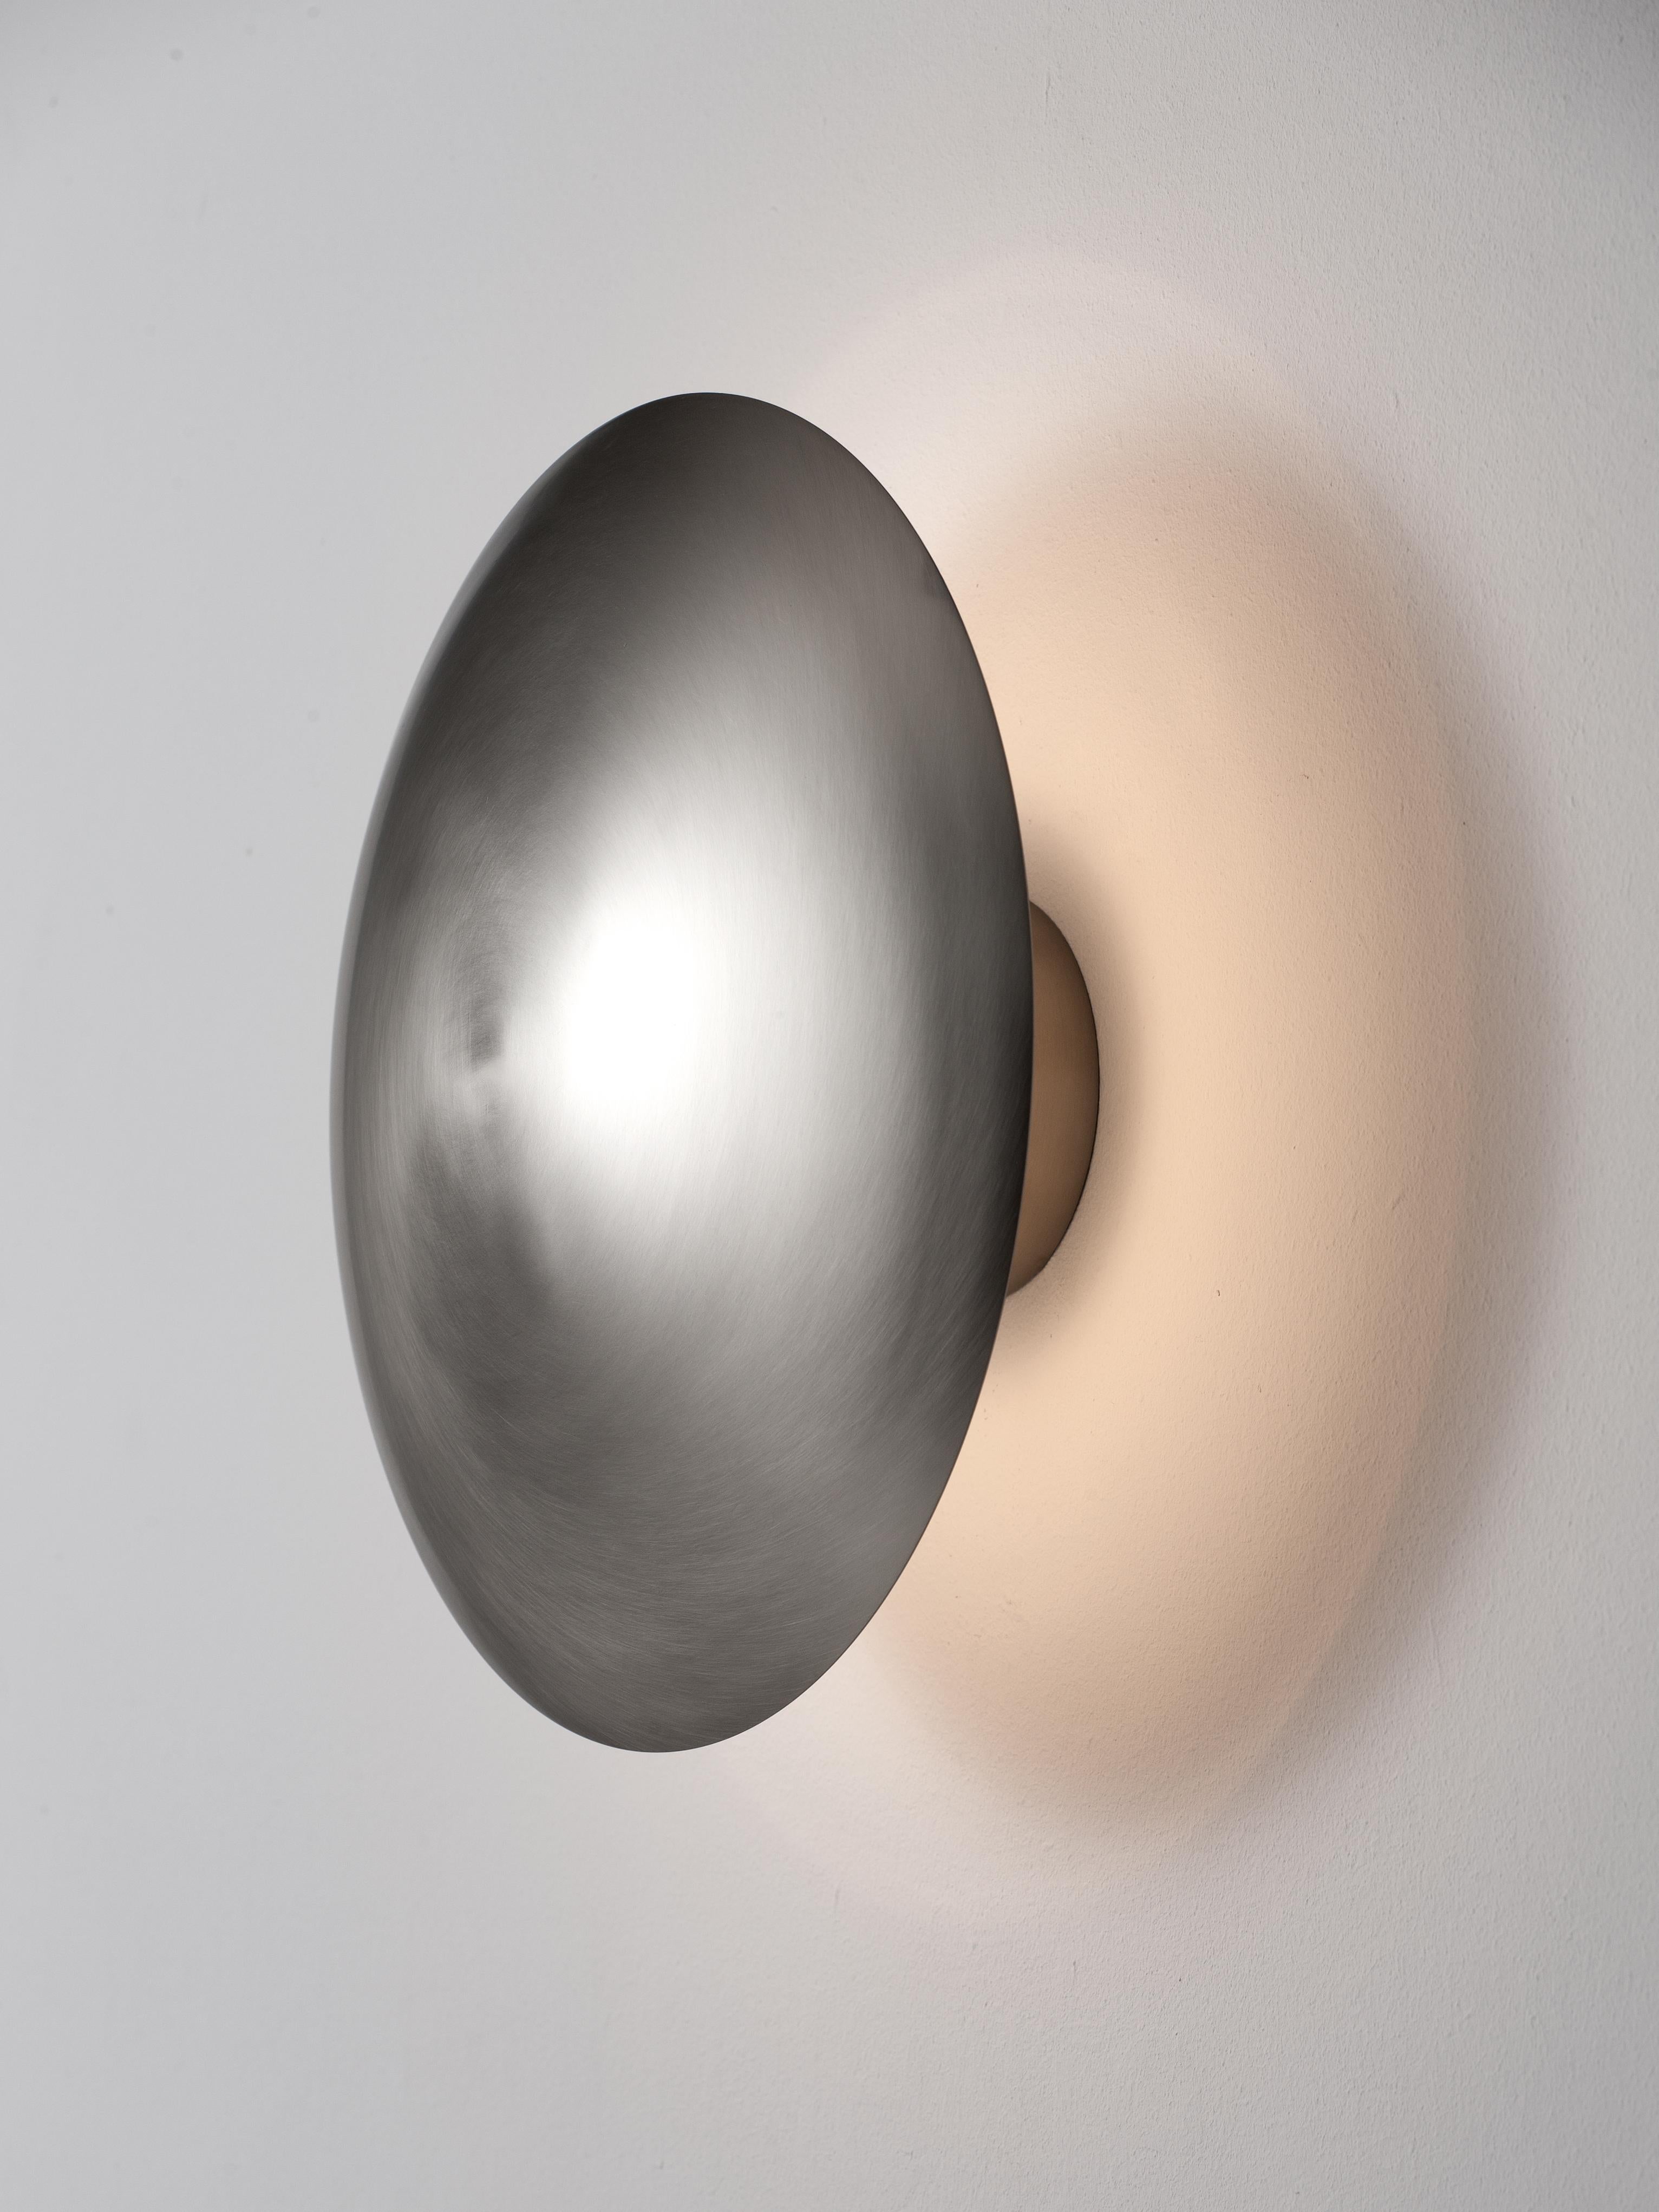 Large Disco wall lamp by Jordi Miralbell, Mariona Raventós
Dimensions: D 35 x W 14.5 x H 35 cm
Materials: Metal.
Available in 2 sizes: D24, D35 cm.

This metallic disc, available in two sizes, M and L, reflects its light on the wall, creating a halo